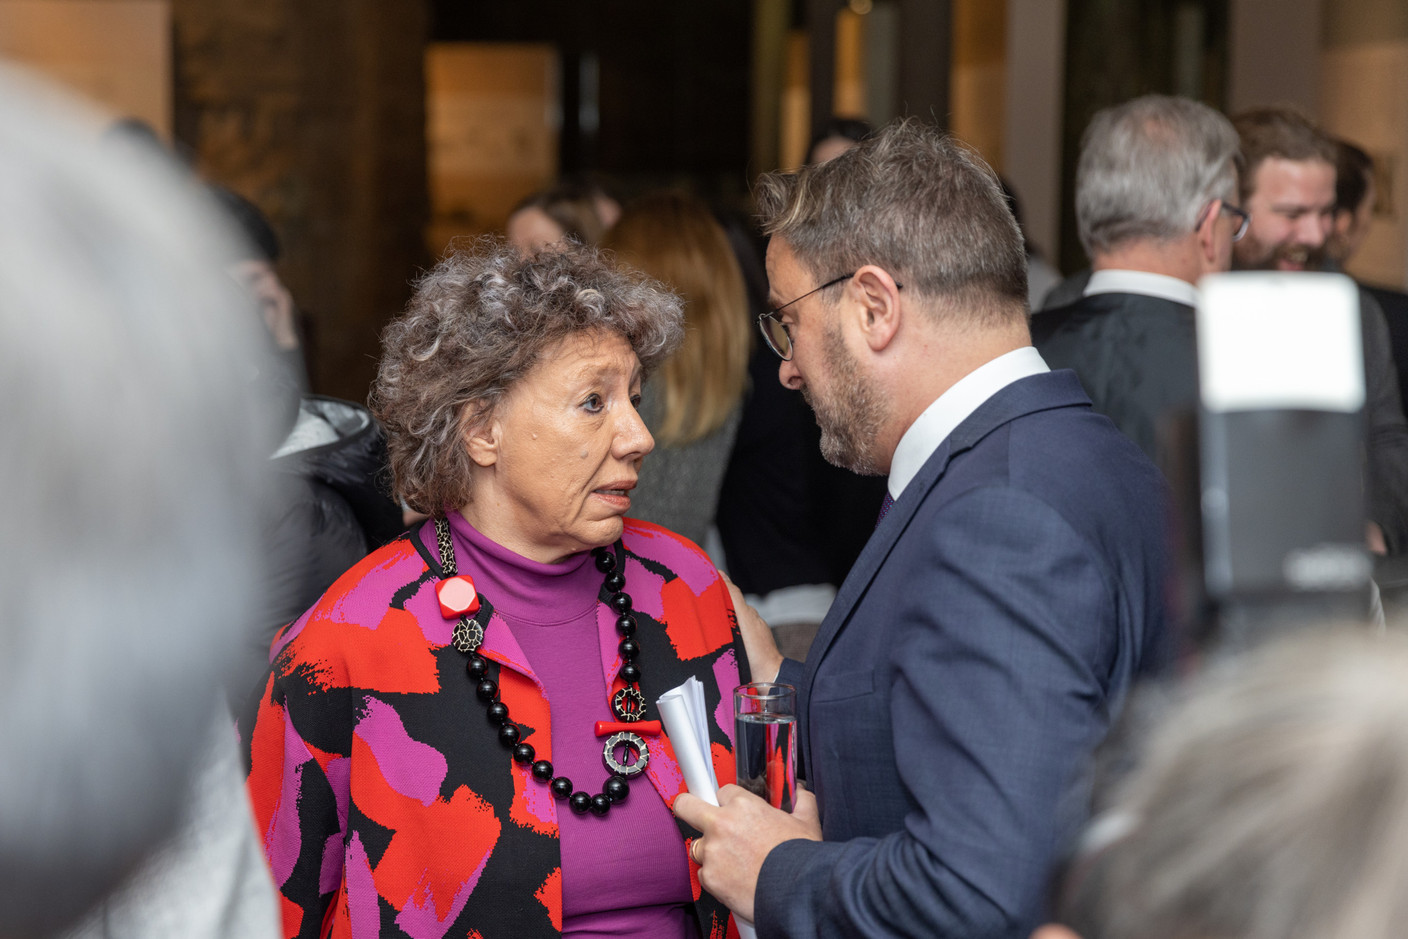 Prime minister Xavier Bettel (r.) speaking with Colette Mart, a retired journalist who worked in Luxembourg’s media for more than three decades. Mart is an alderwoman on the City of Luxembourg council  Photo: Romain Gamba